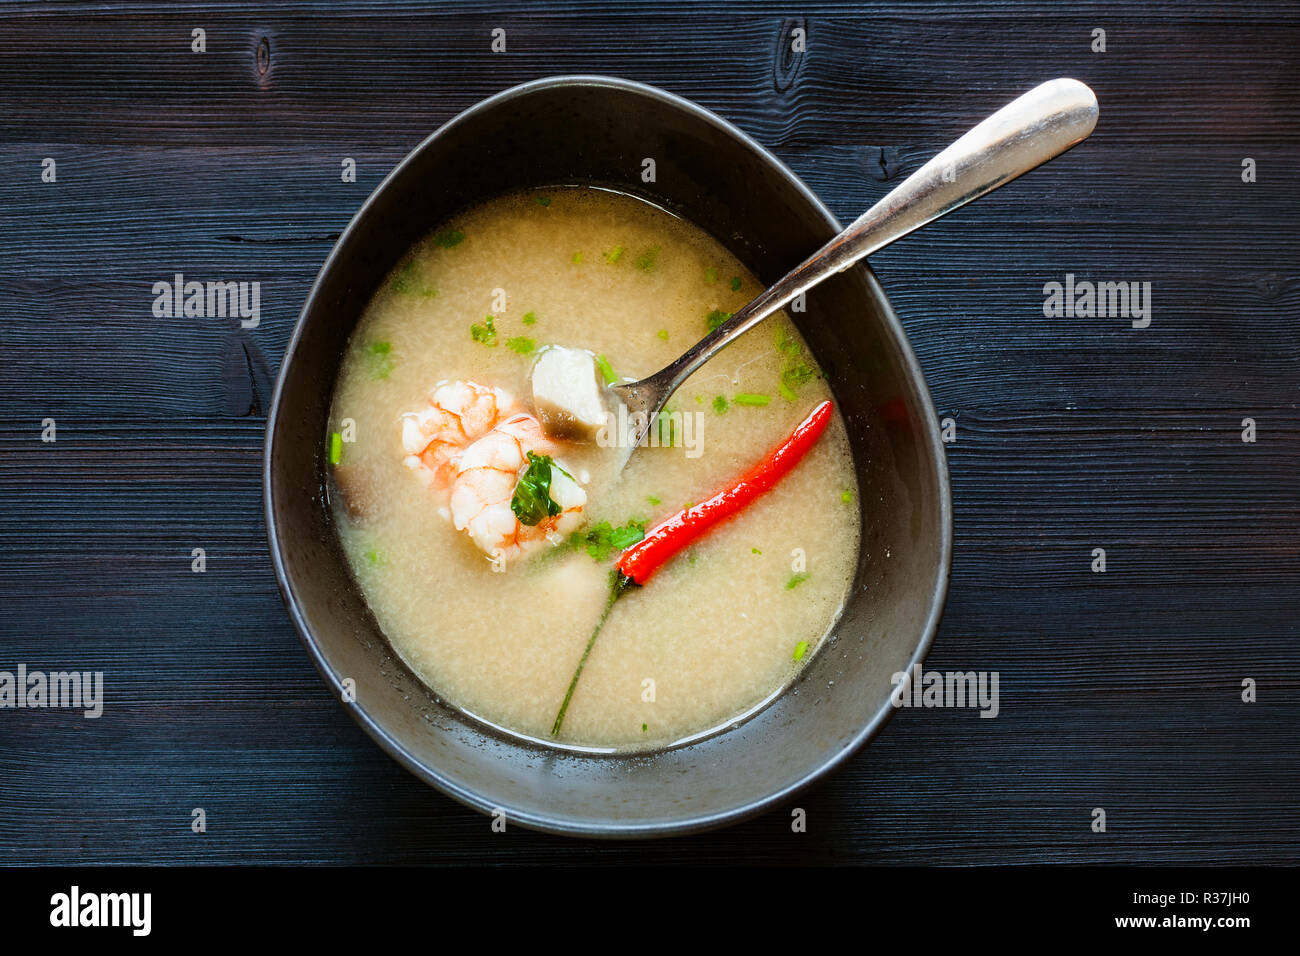 Thai cuisine dish - top view of bowl with Tom Kha Thale (Tom kha kai, Tom Kha Gai, Thai Coconut Soup) sour and spicy soup with shrimps and mushrooms o Stock Photo